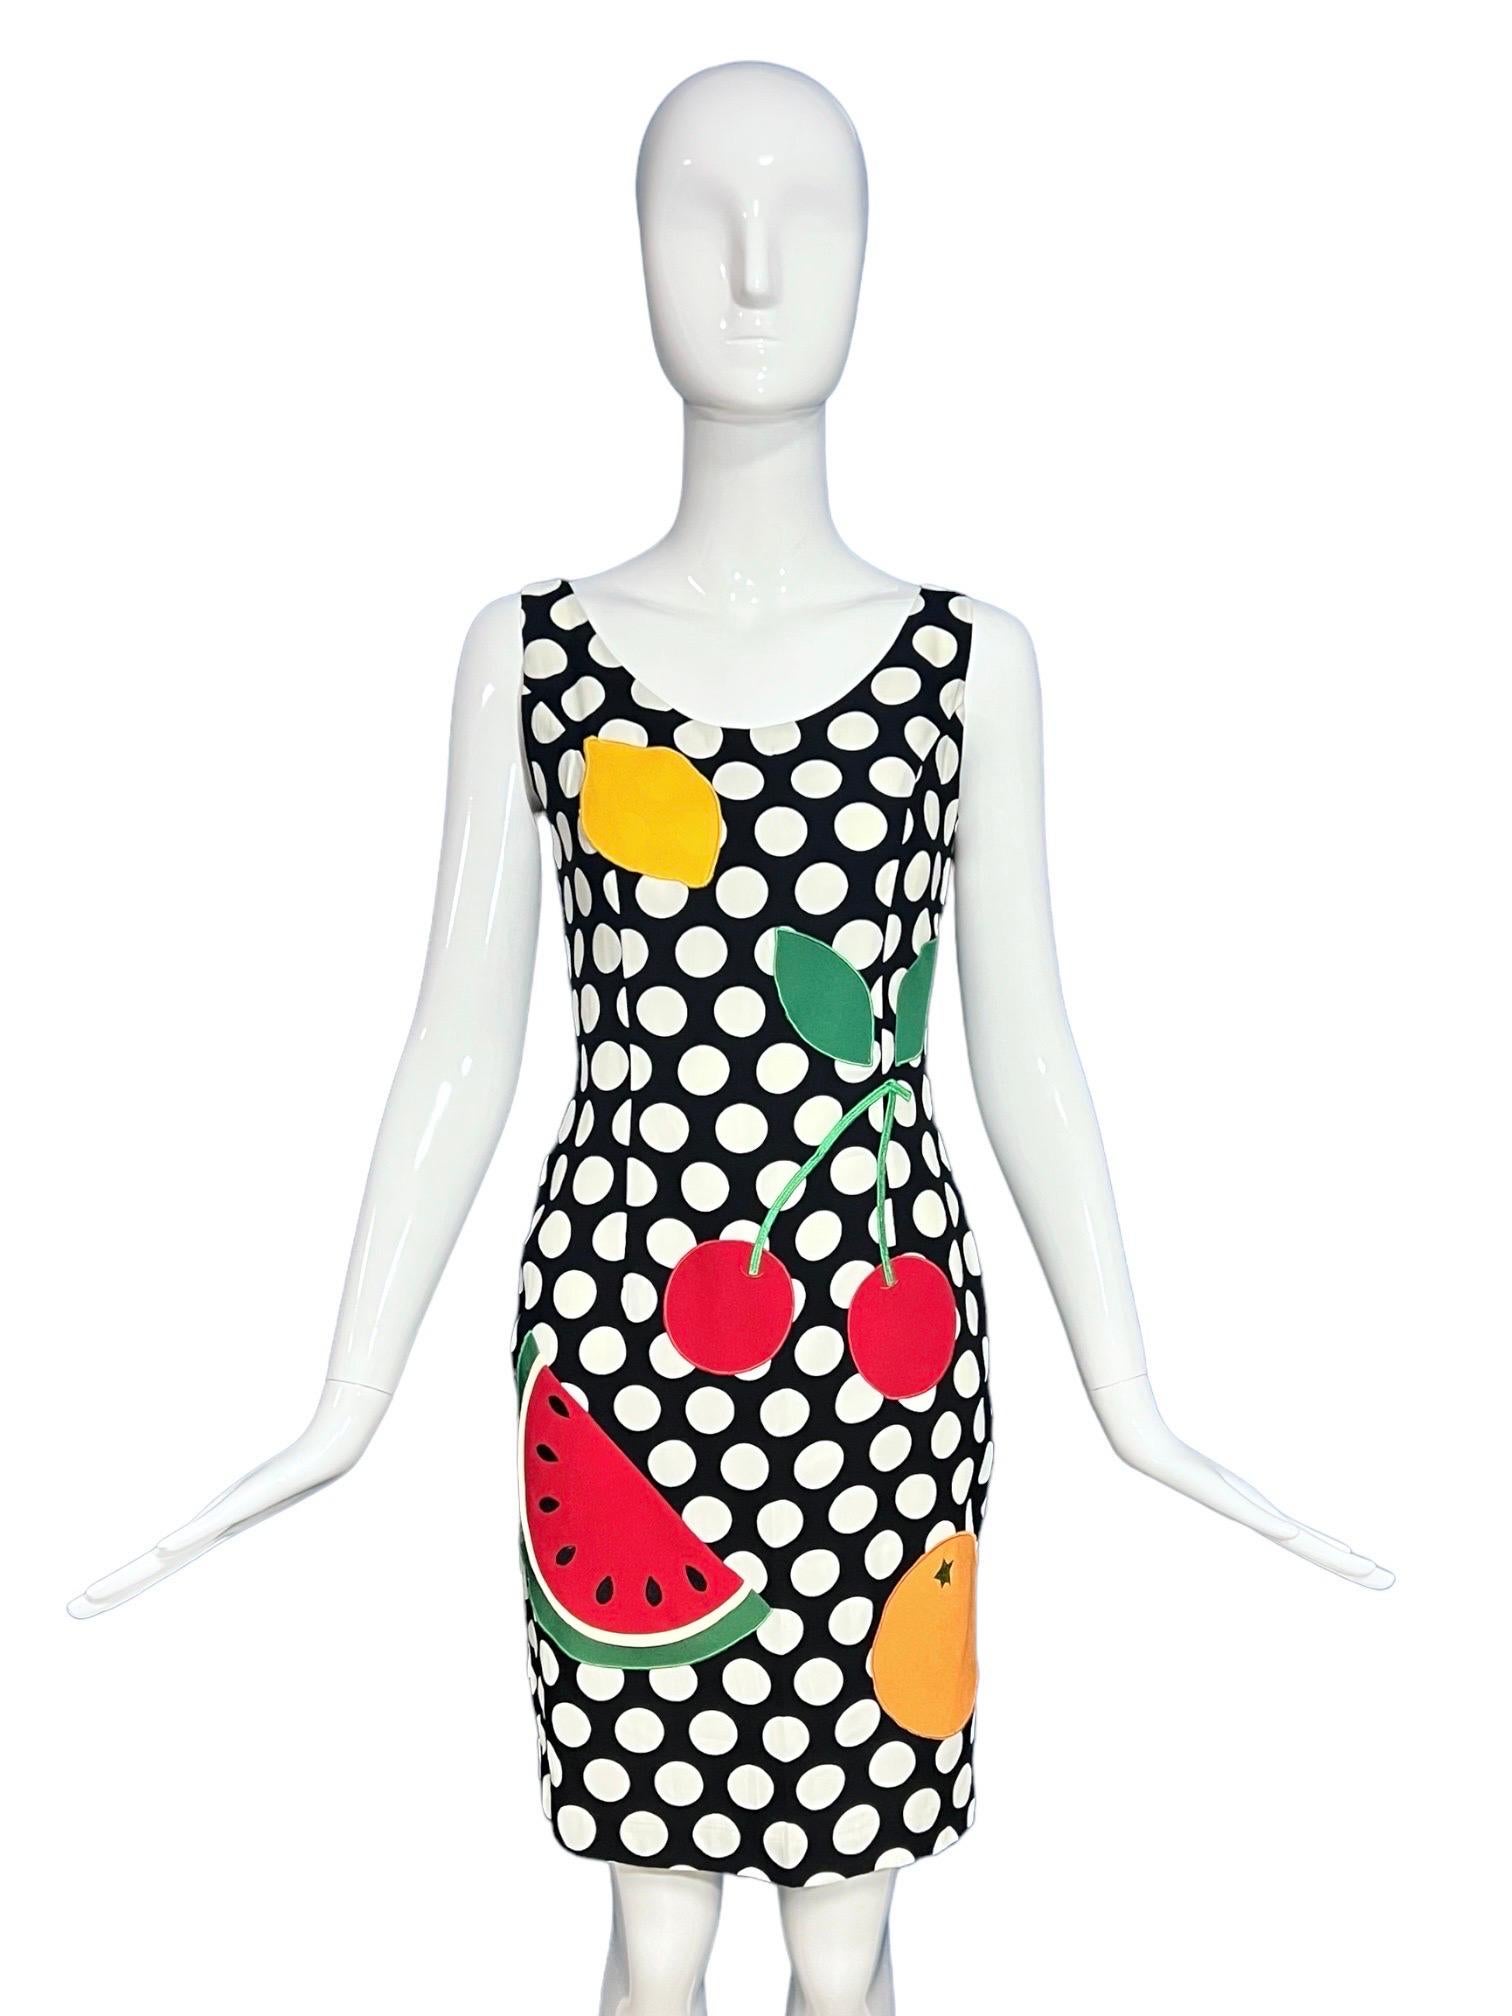 Highly collectable and iconic 1990's polka dot fruit appliqué dress by Moschino Cheap & Chic as seen on Fran Dresher in The Nanny.
This iconic Moschino dress from the 1990s is made of a lightweight crêpe fabric with white polka dots against a black